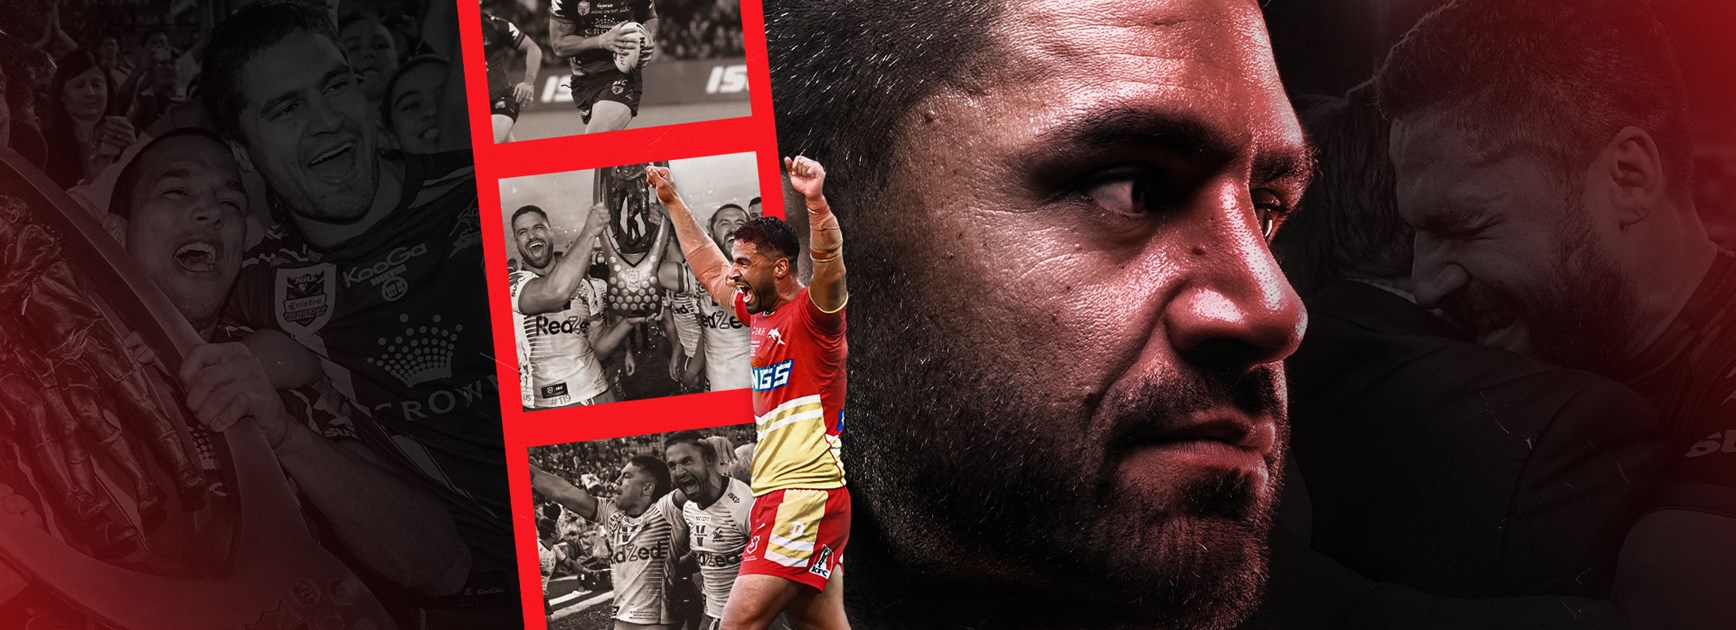 Jesse Bromwich: The story behind the history-maker